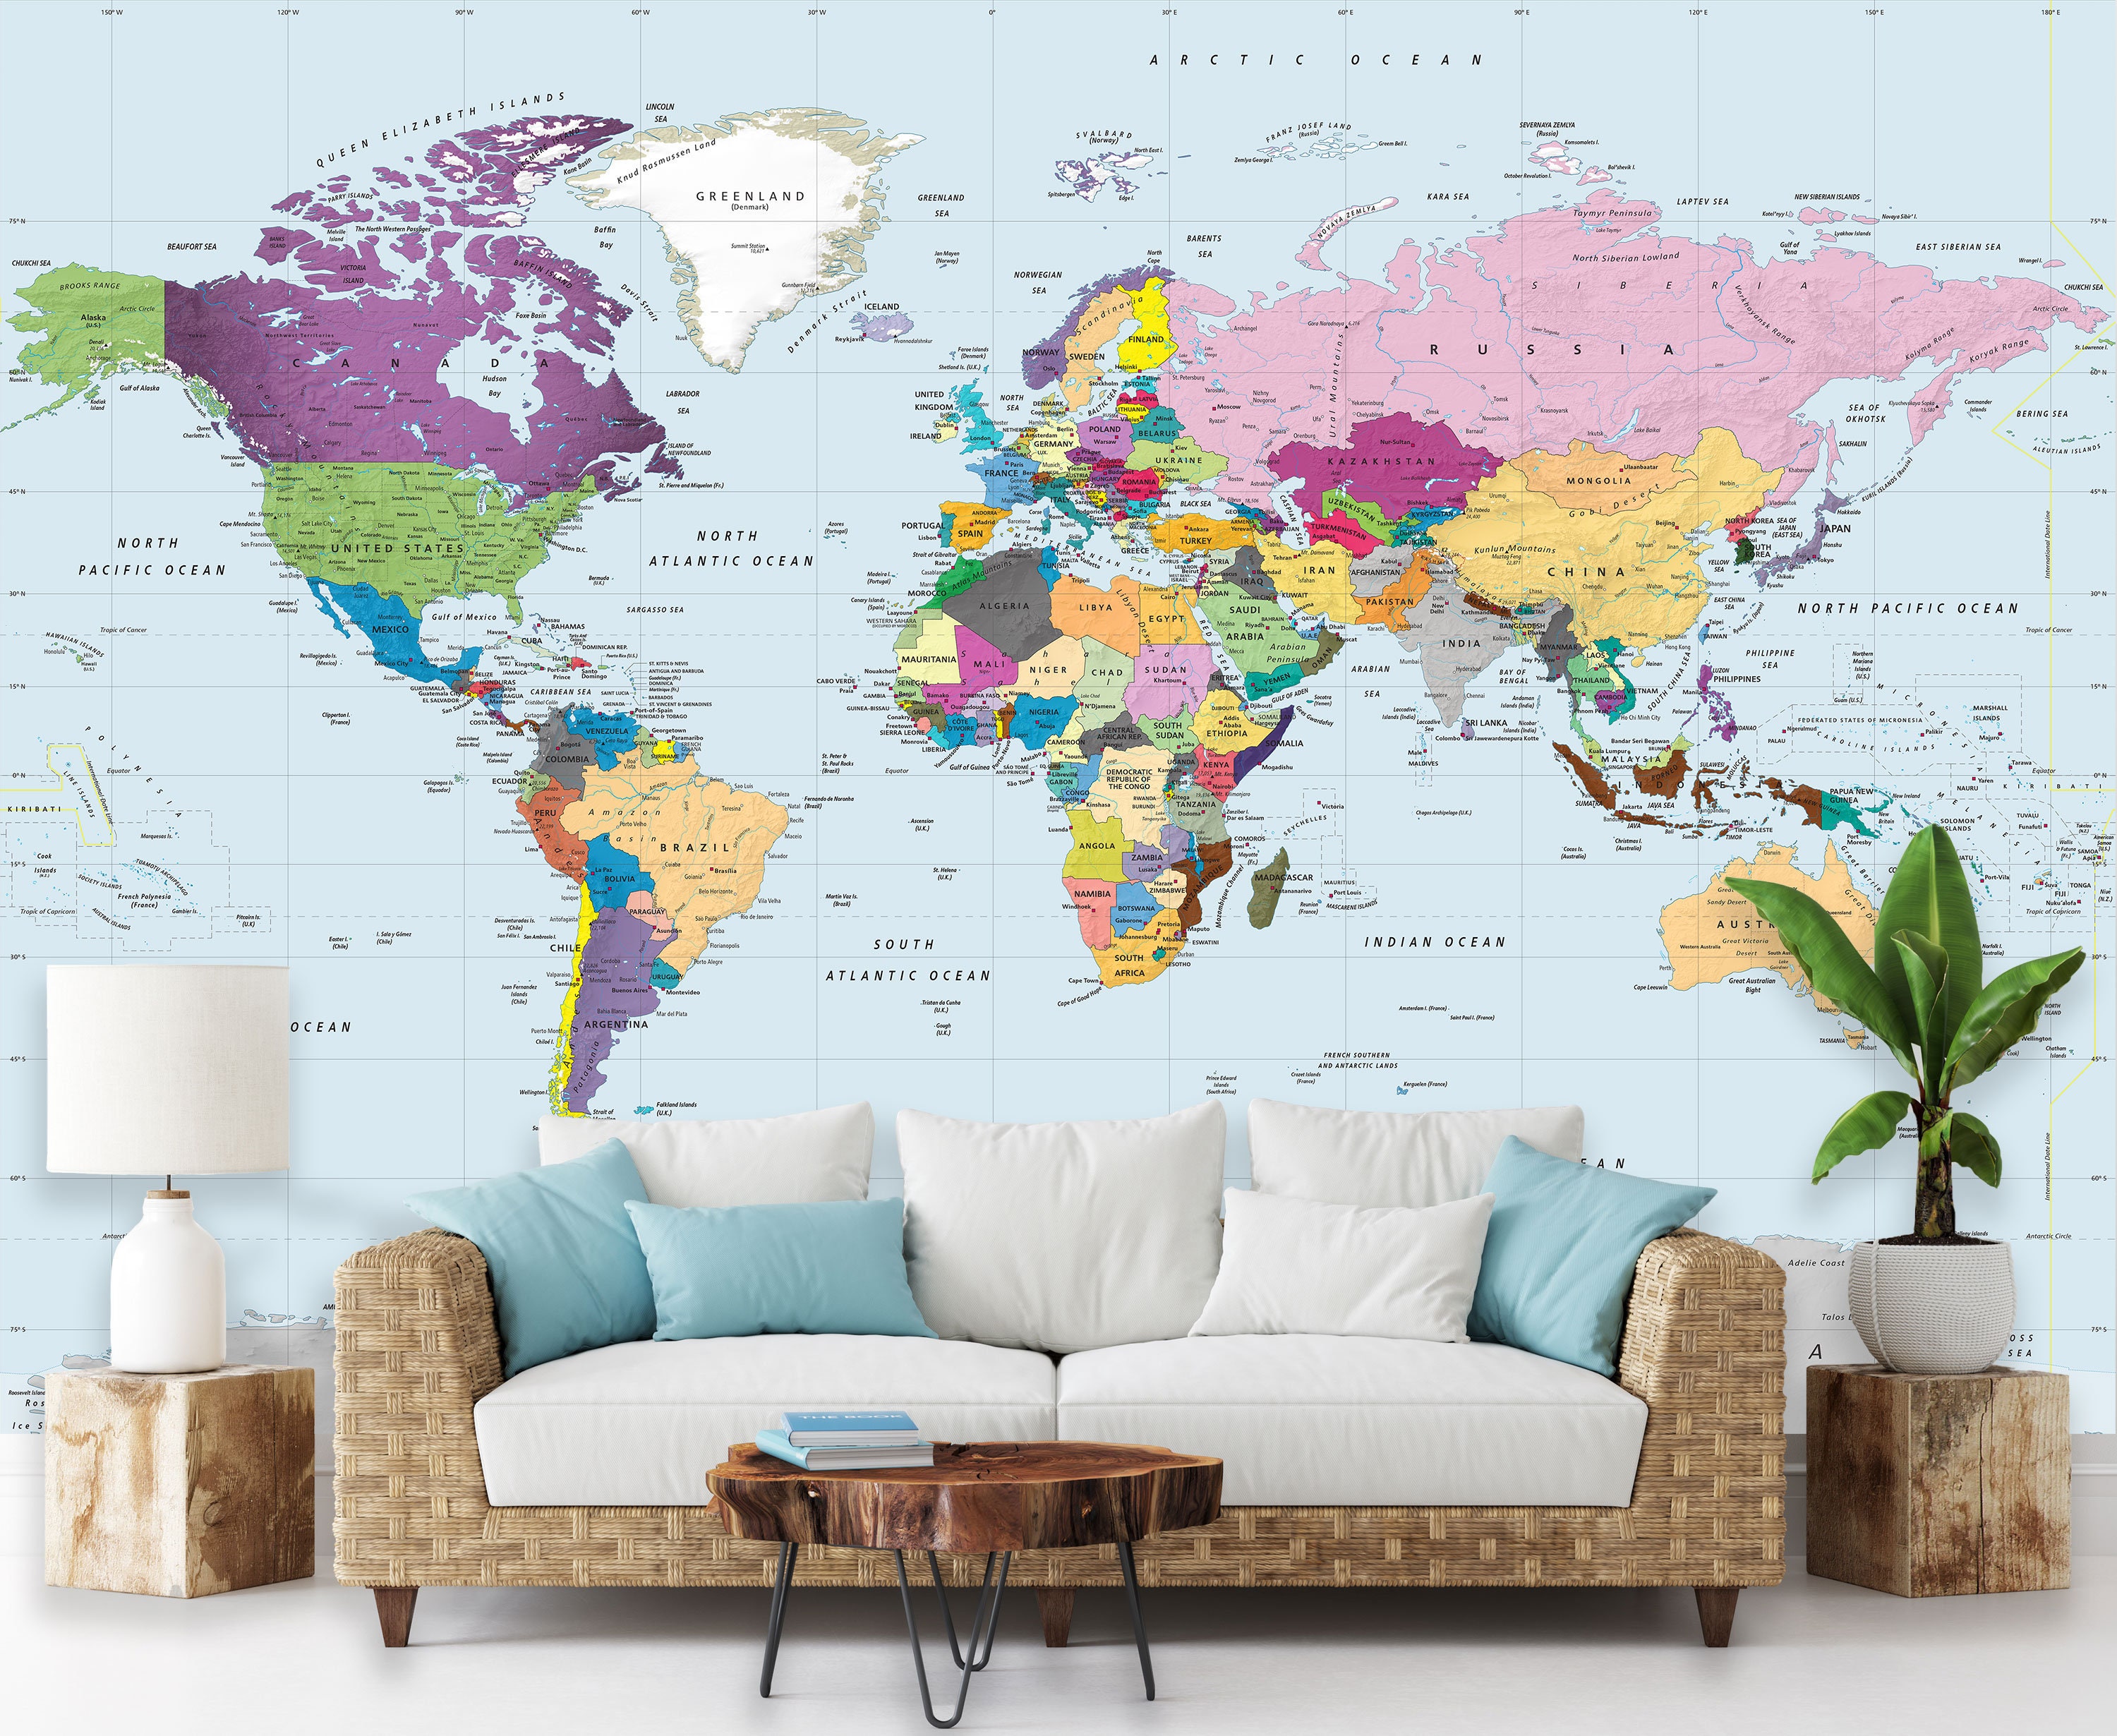 artgeist Wall Mural World Map 116x83 in - Peel and Stick Self-Adhesive  Wallpaper Removable Large Sticker Foil Wall Decor Print Picture Image  Design k-A-0057-a-b in 2023 | Foil wall decor, Wall murals,